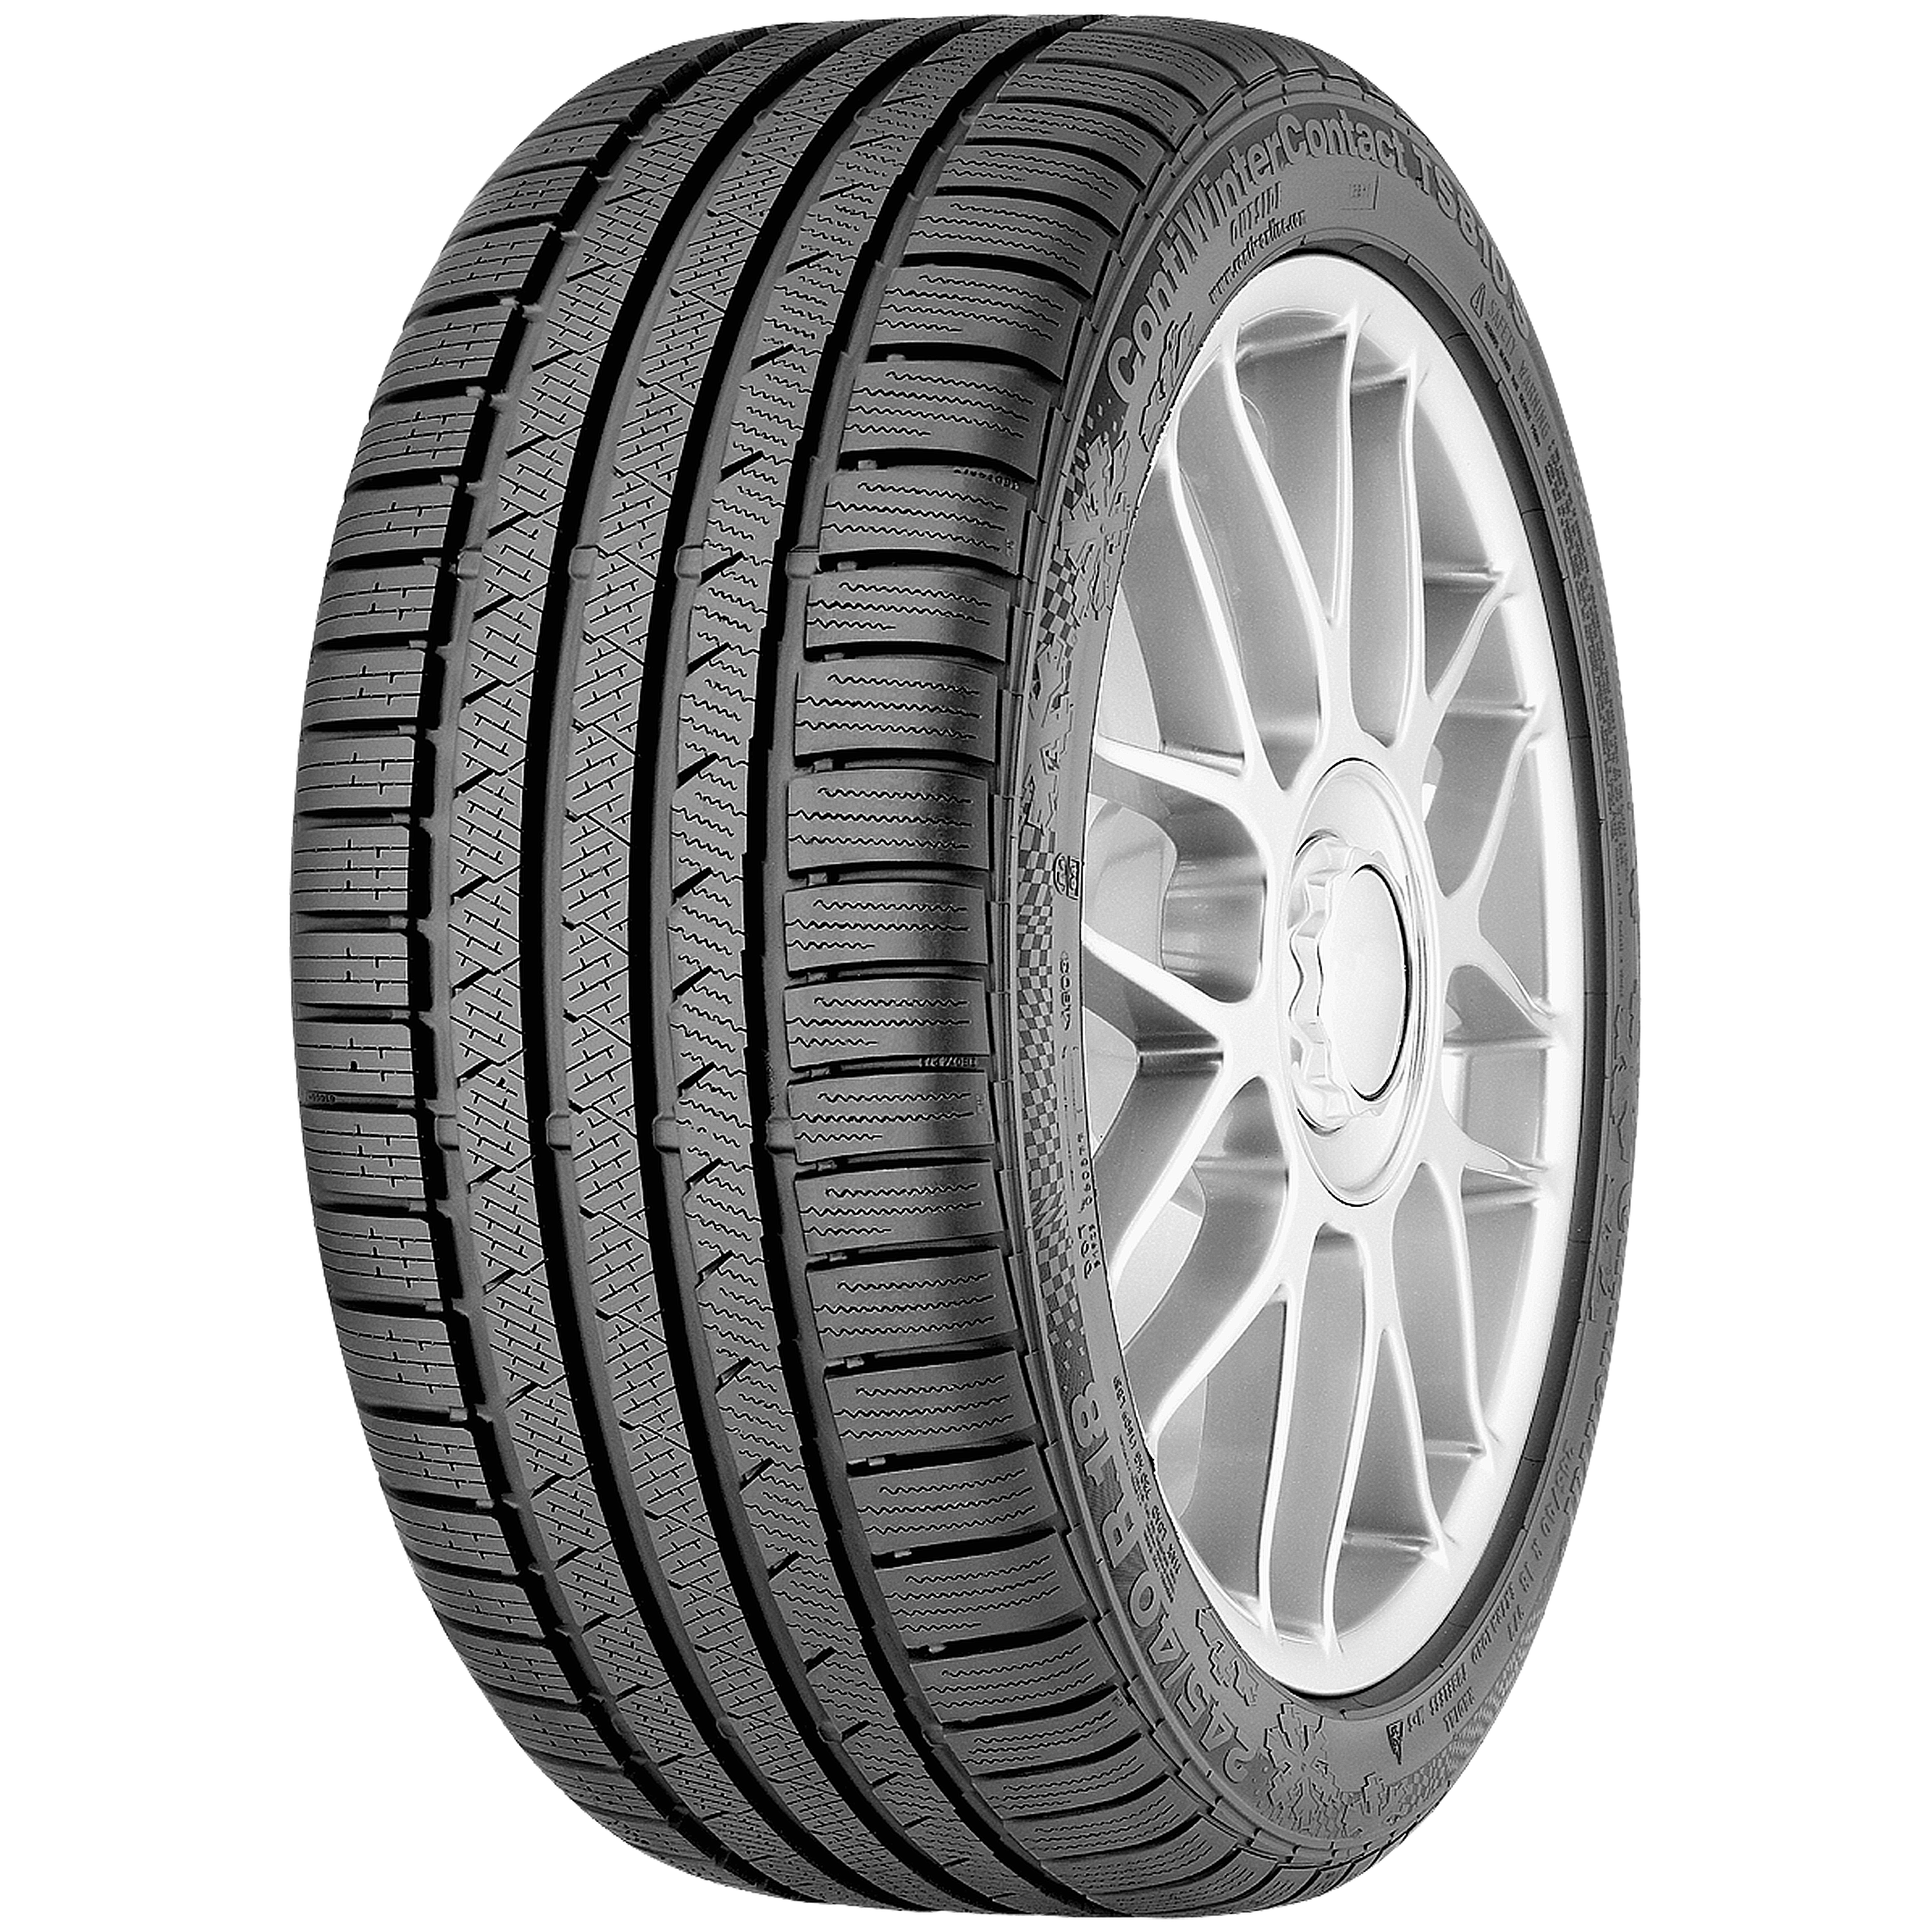 for ContiWinterContact luxury-class winter cars sporty medium and The S: TS 810 powerful tire